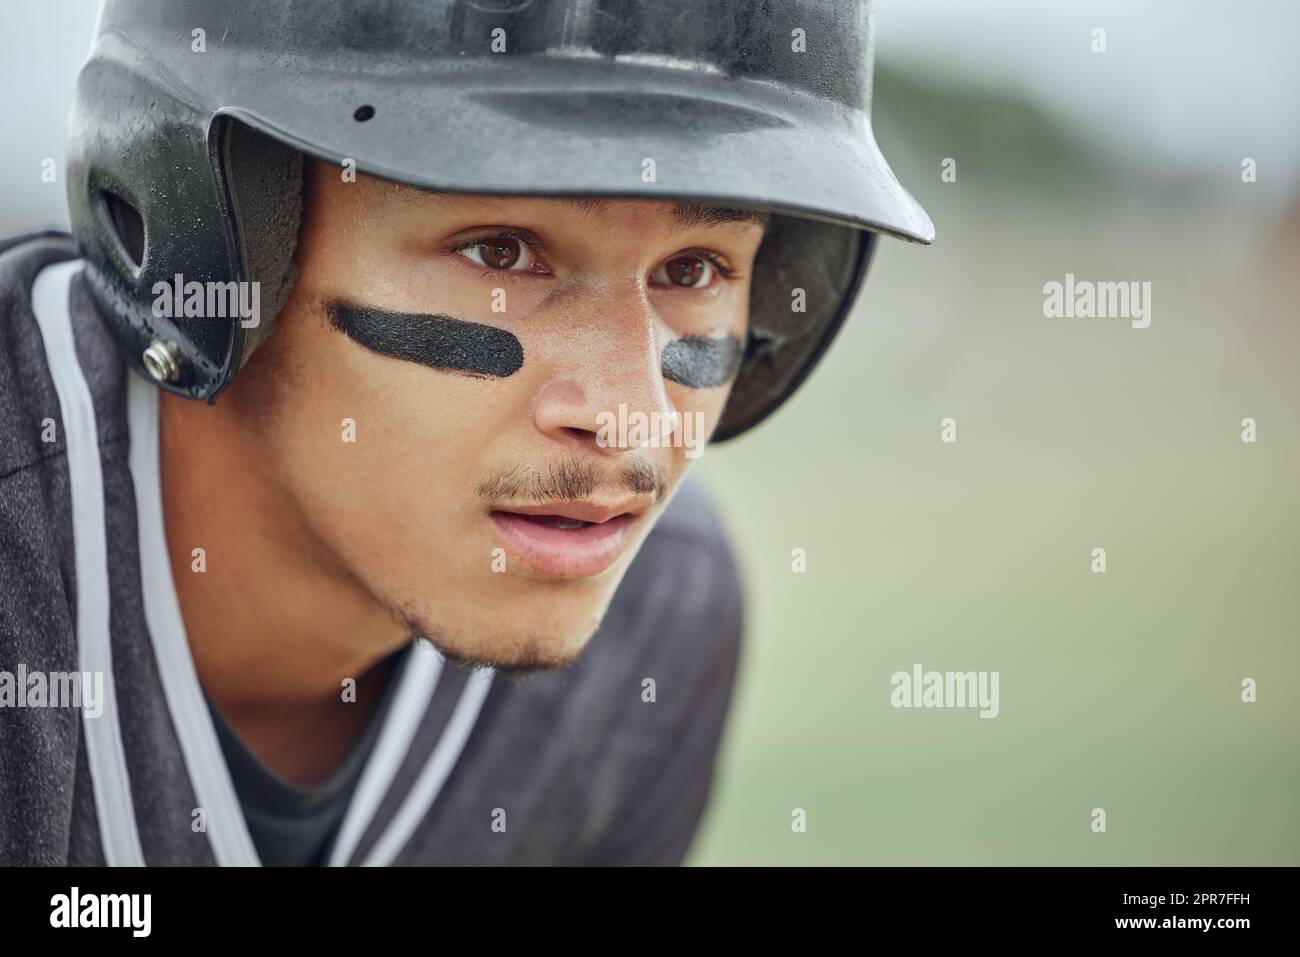 Closeup of baseball player looking focused with warrior paint on his face. Zoomed in on serious fit, active athlete wearing a helmet during a game on a pitch. Headshot of sporty man playing a match Stock Photo